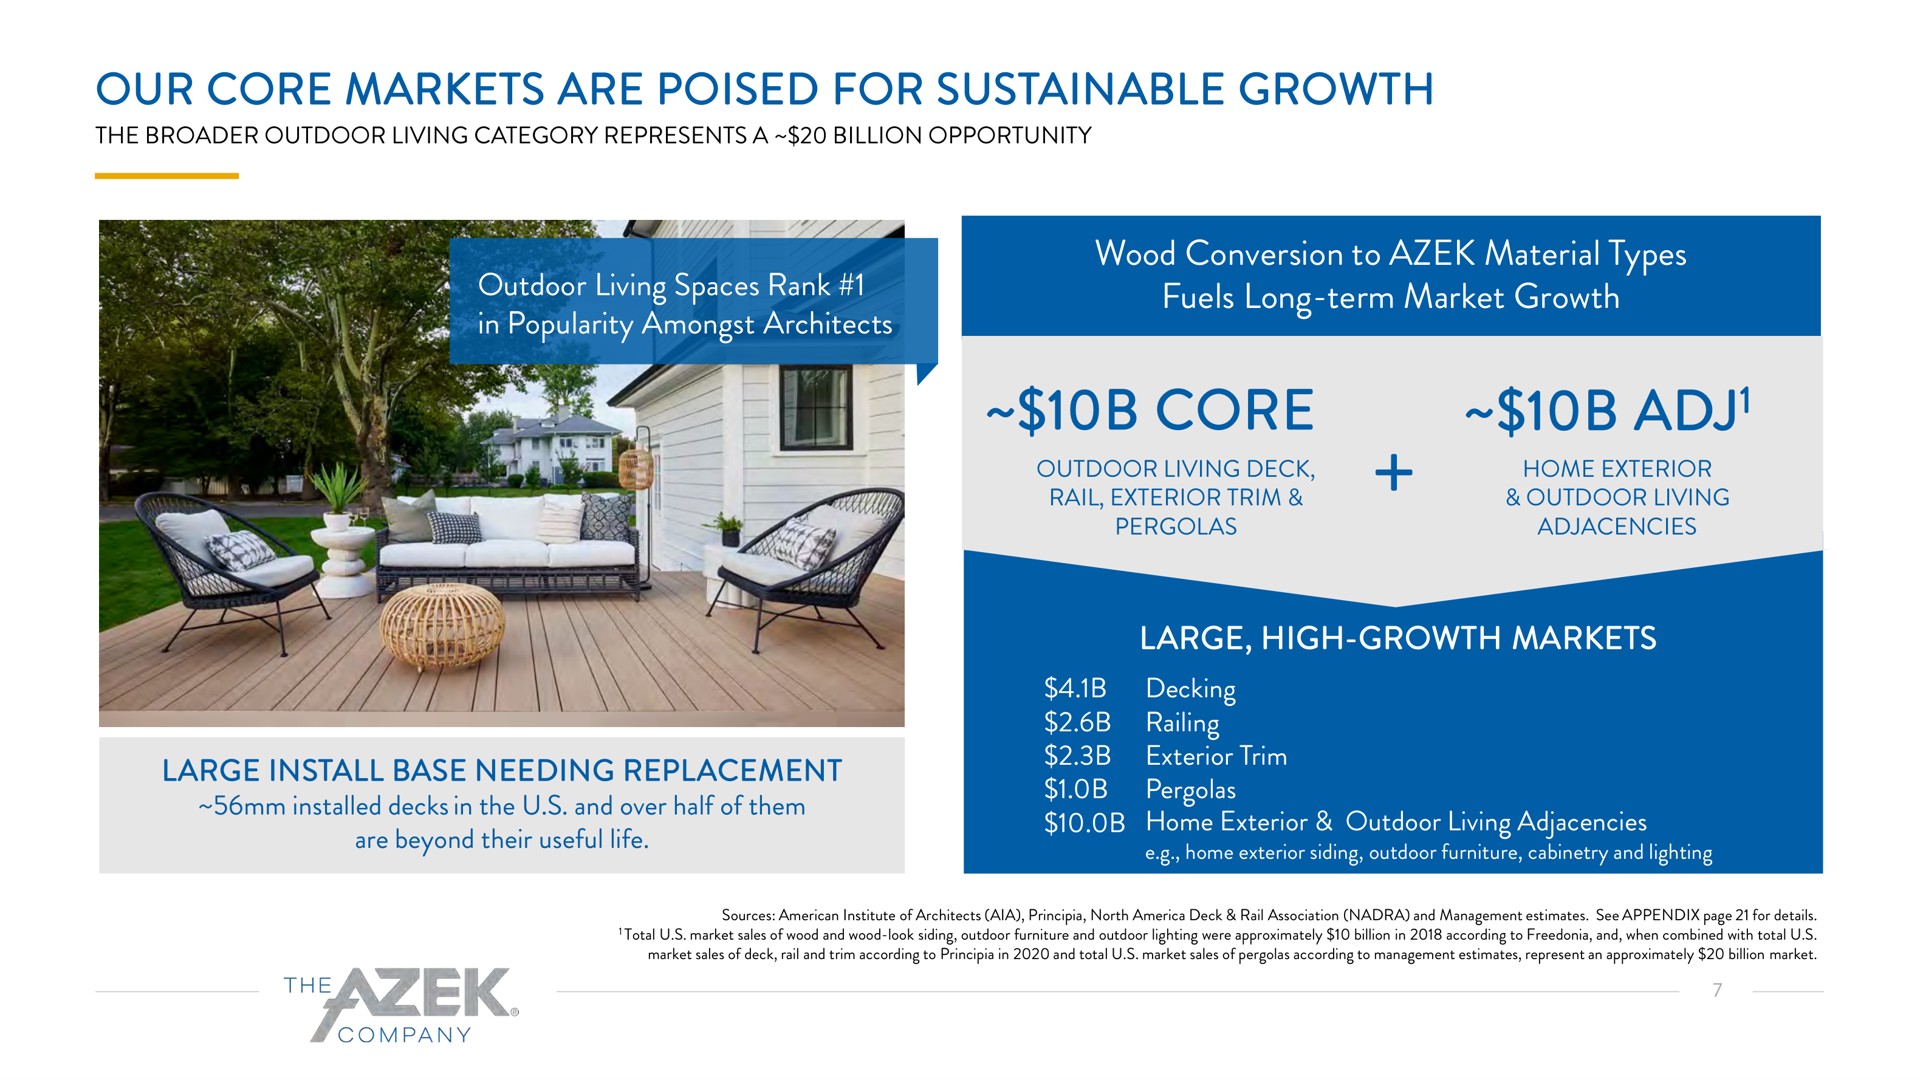 our core markets are poised for sustainable growth outdoor living spaces rank in popularity amongst architects wood conversion to material types fuels long term market growth core large high growth markets large install base needing replacement | Azek